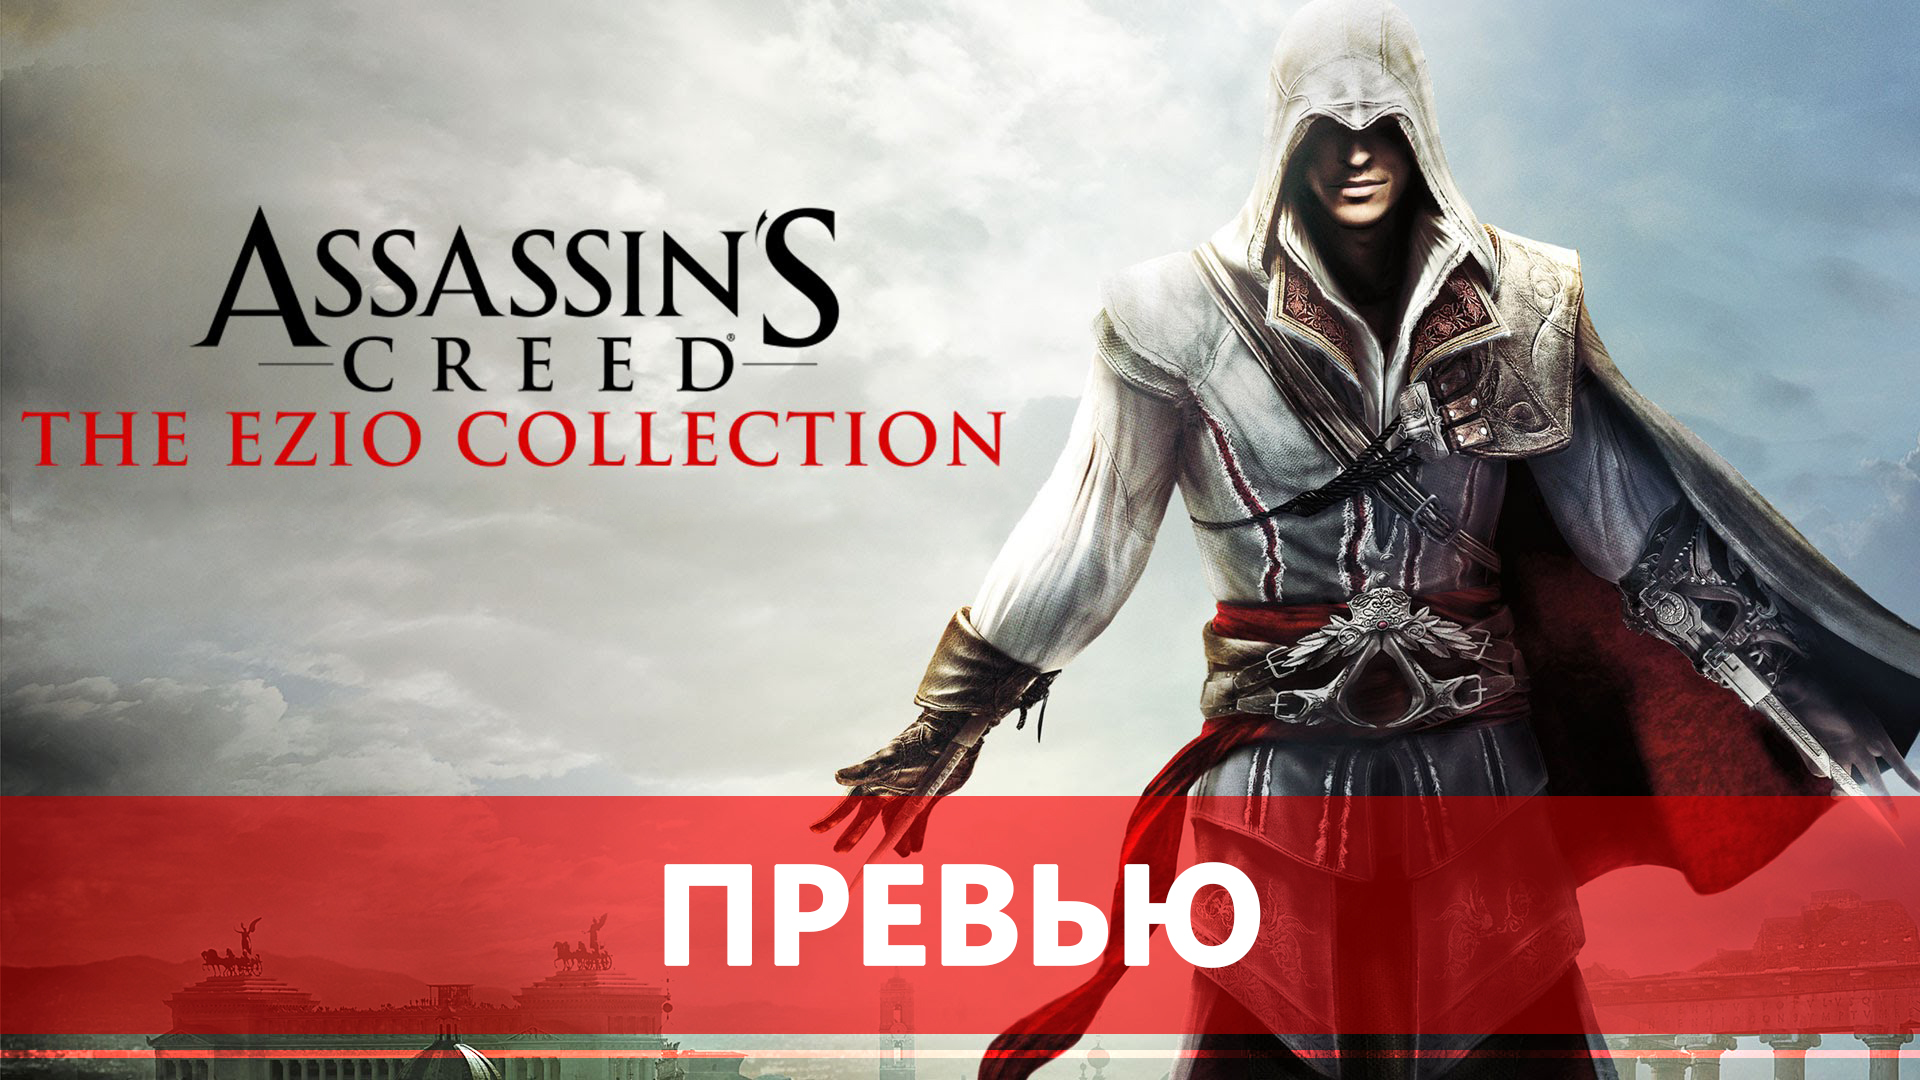 Assassins creed the ezio collection steam фото 83